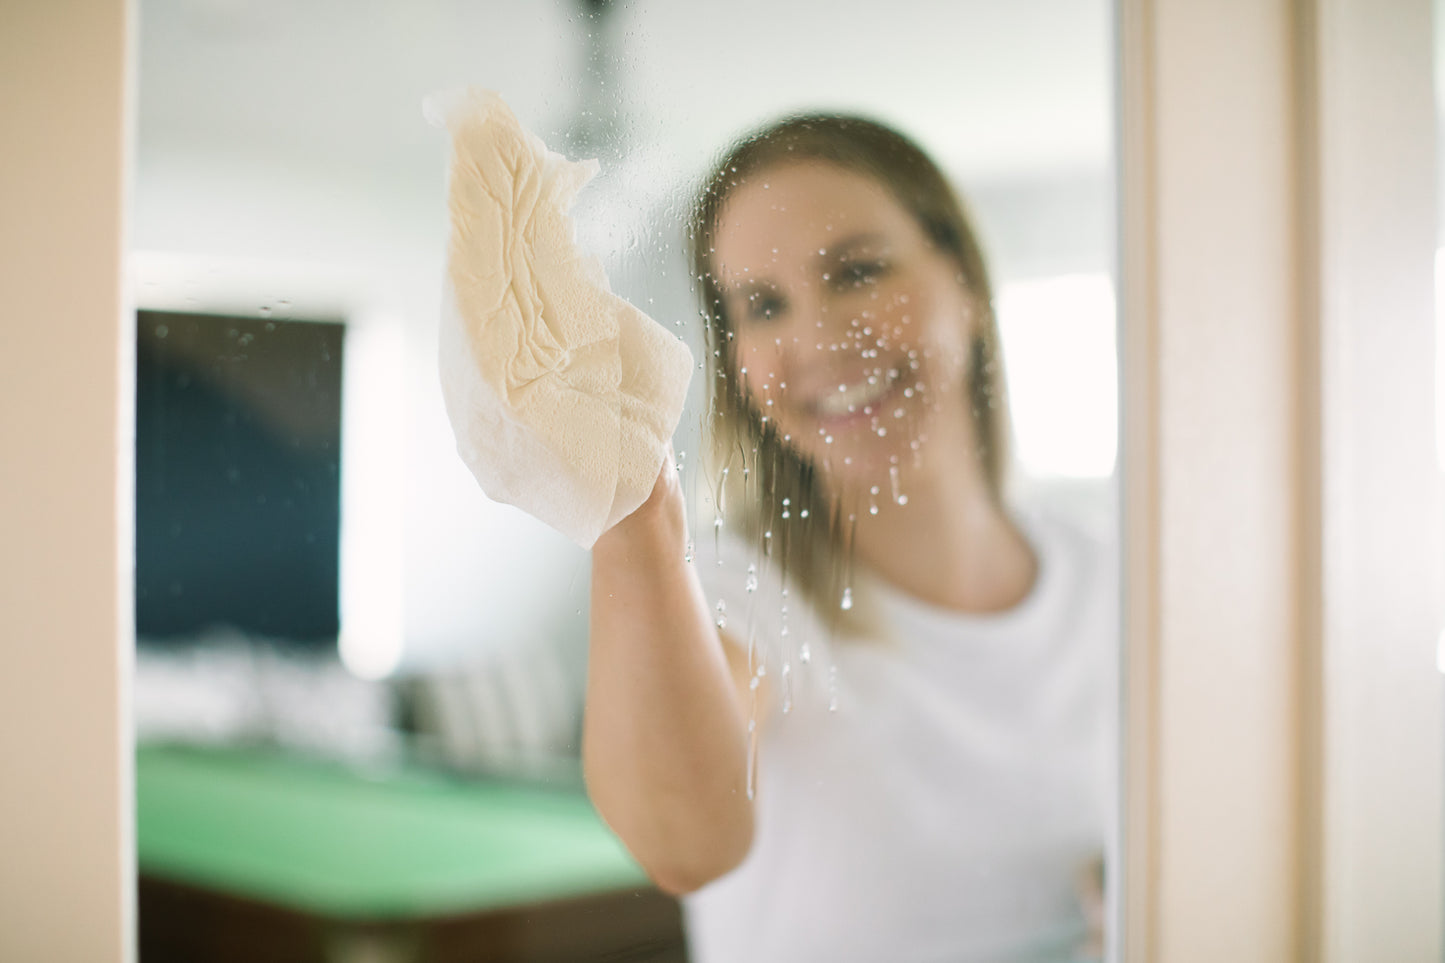 view of eco window cleaning spray on a mirror with woman blurred out in background